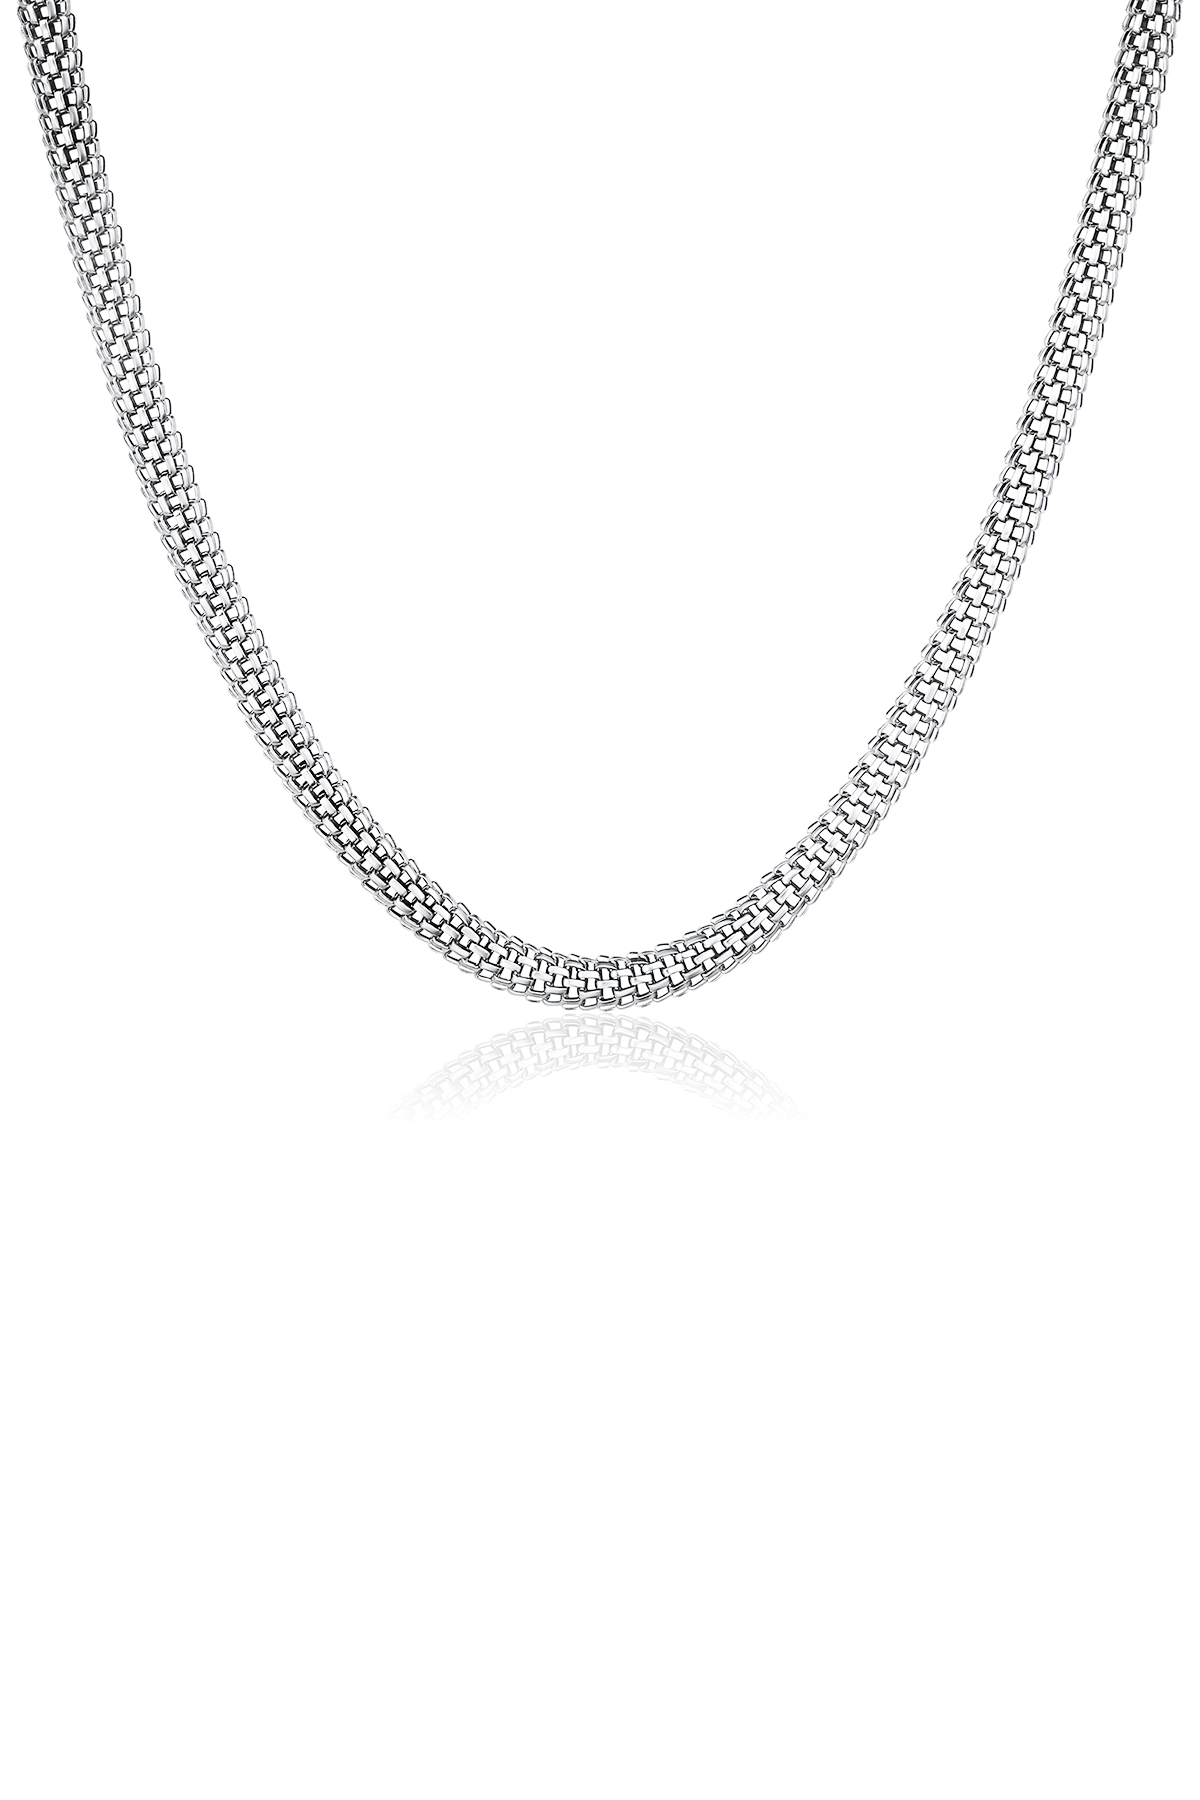 Cable necklace, silver - 5 mm